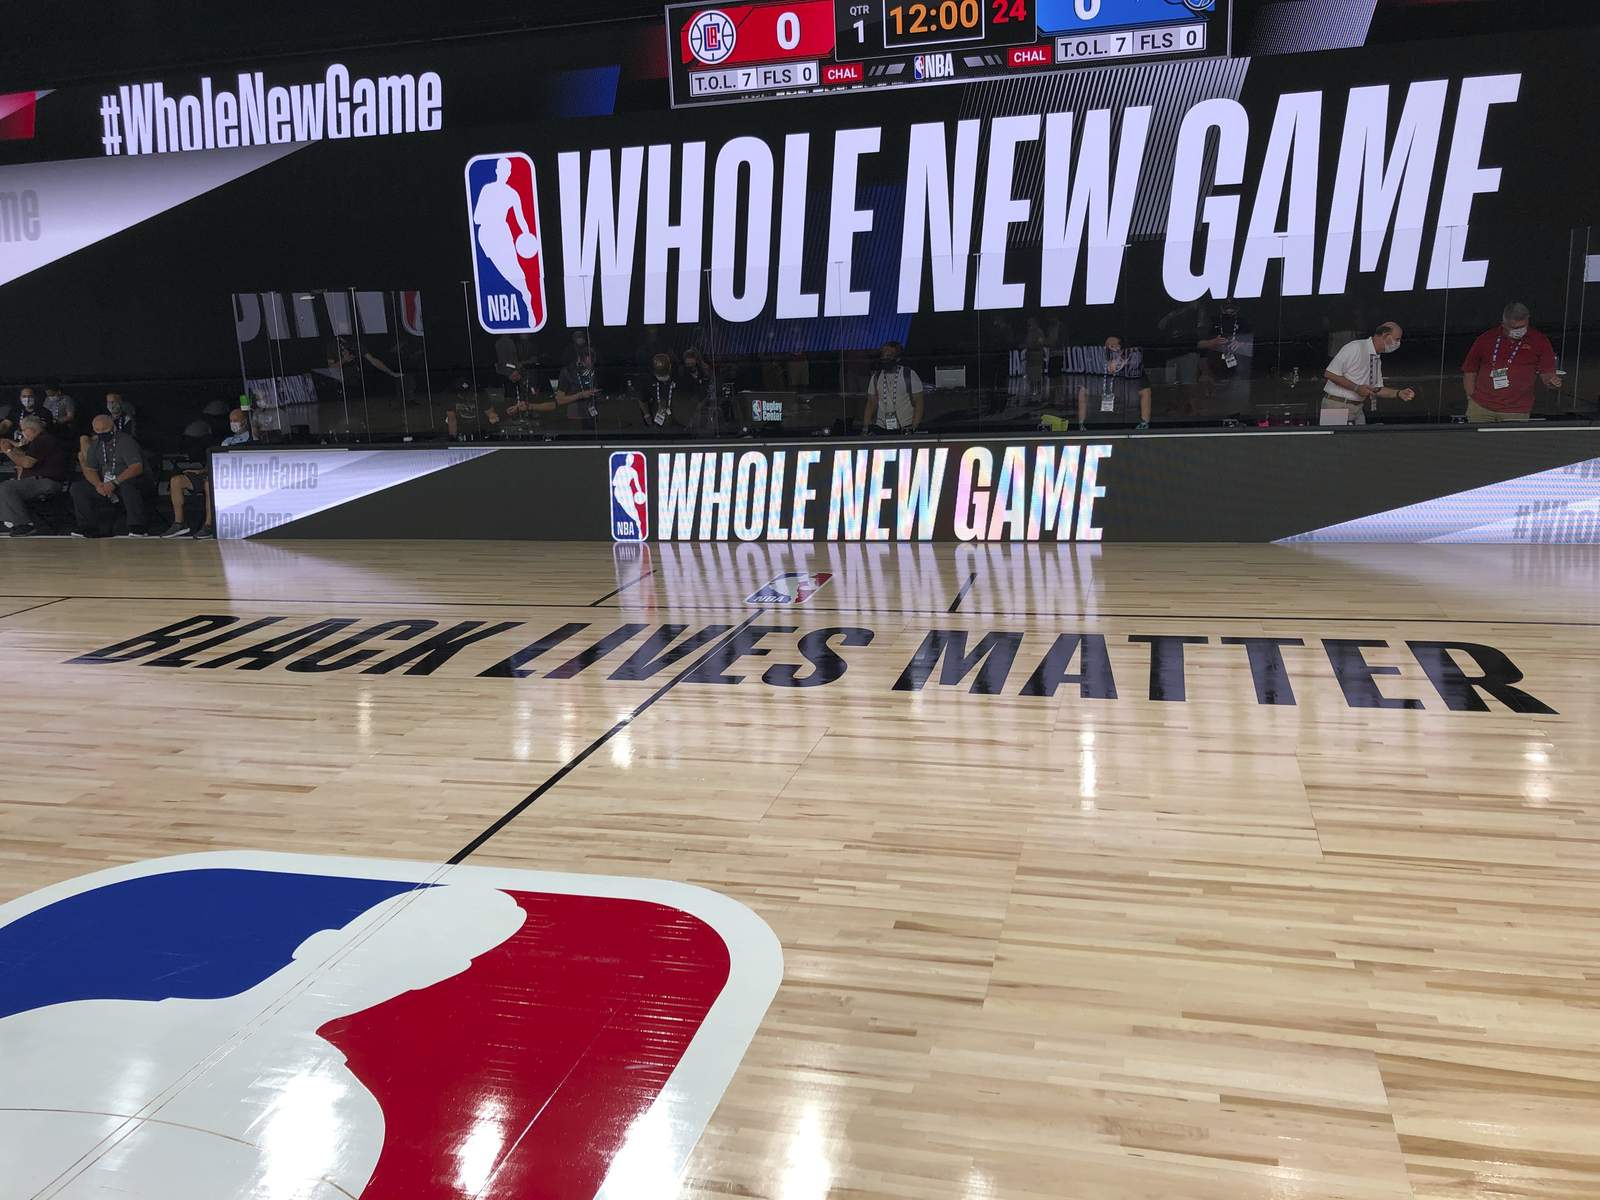 For the NBA, it's time to play, kneel and demand change